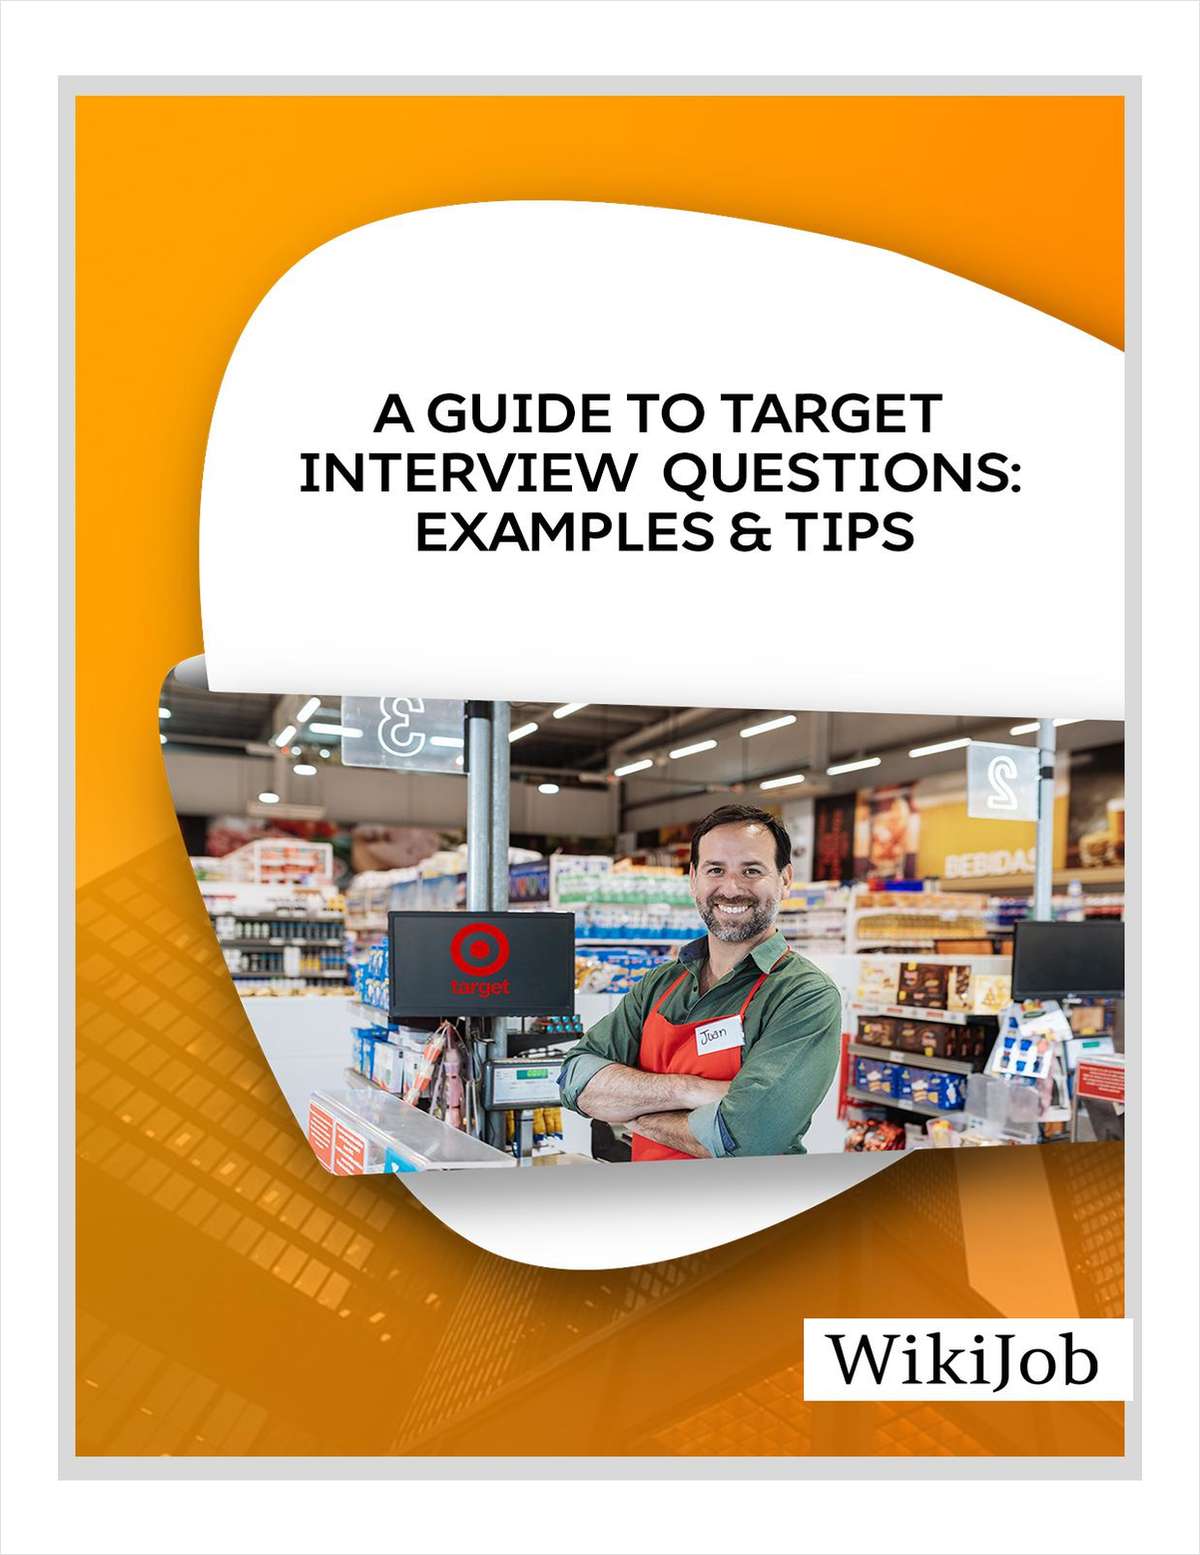 A Guide to Target Interview Questions: Examples & Tips